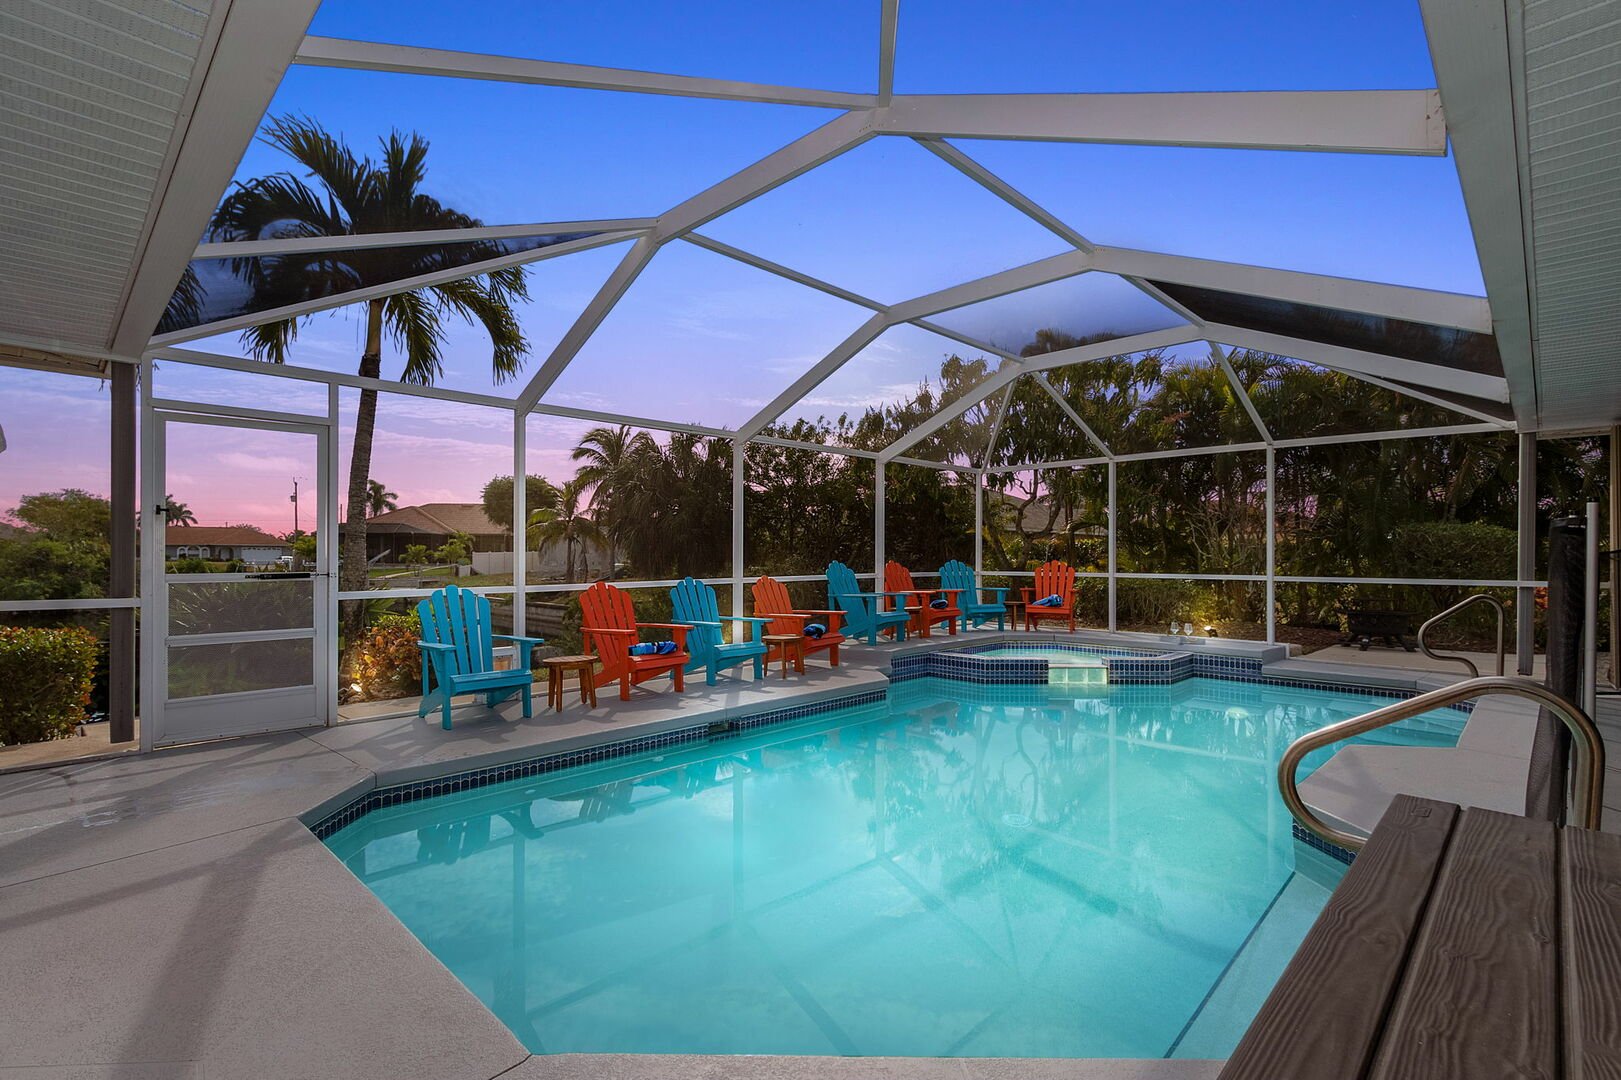 VILLA X-TA-SEA, CAPE CORAL FLORIDA, USA
Private Vacation Home For Rent

(4 bedrooms, 6 beds, 2 full baths, hosts up to 12 guests, heated pool and spa, Gulf of Mexico boat access)